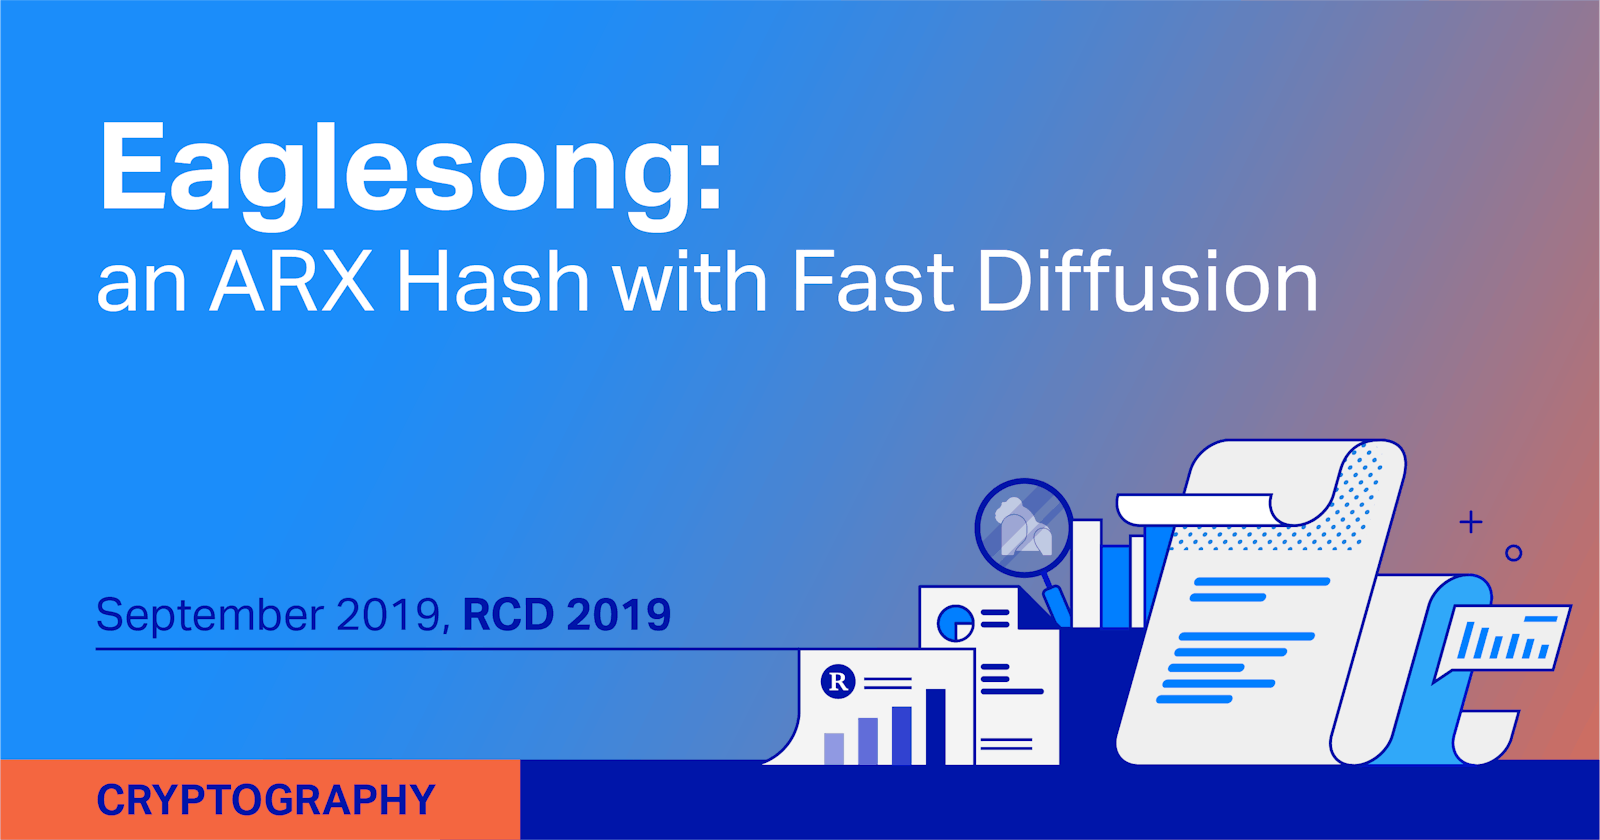 Eaglesong: an ARX Hash with Fast Diffusion